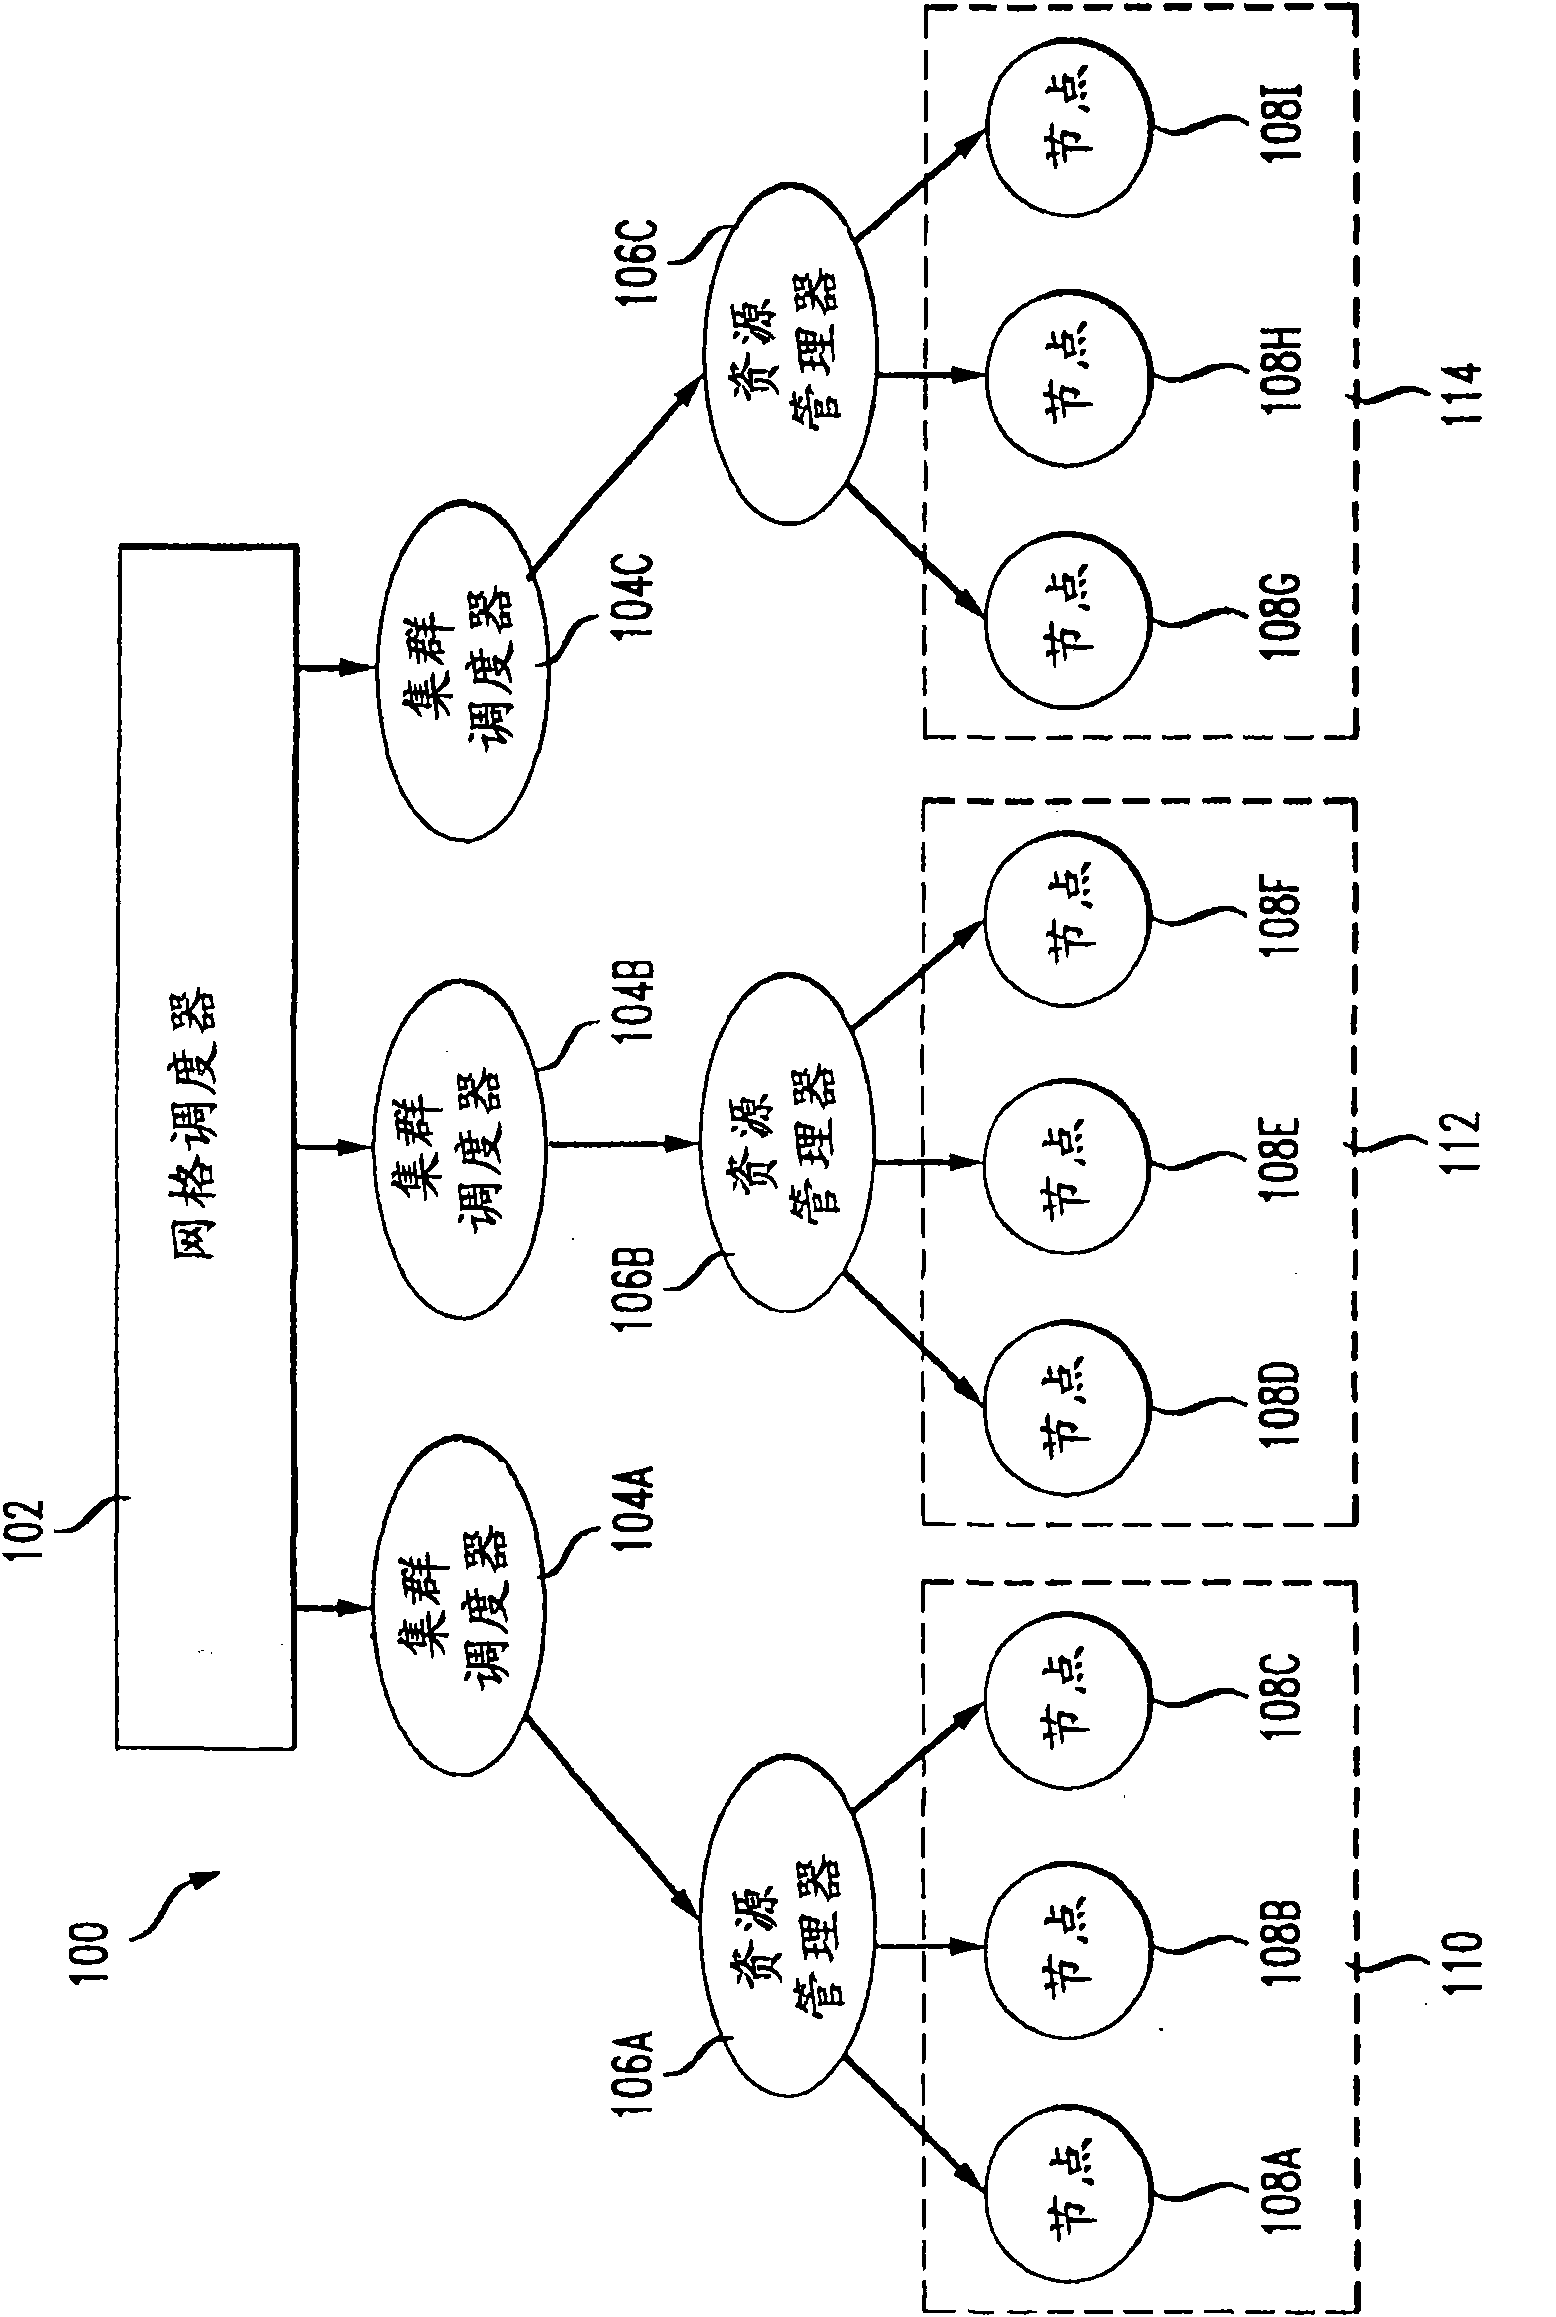 System and method for managing energy consumption in a compute environment